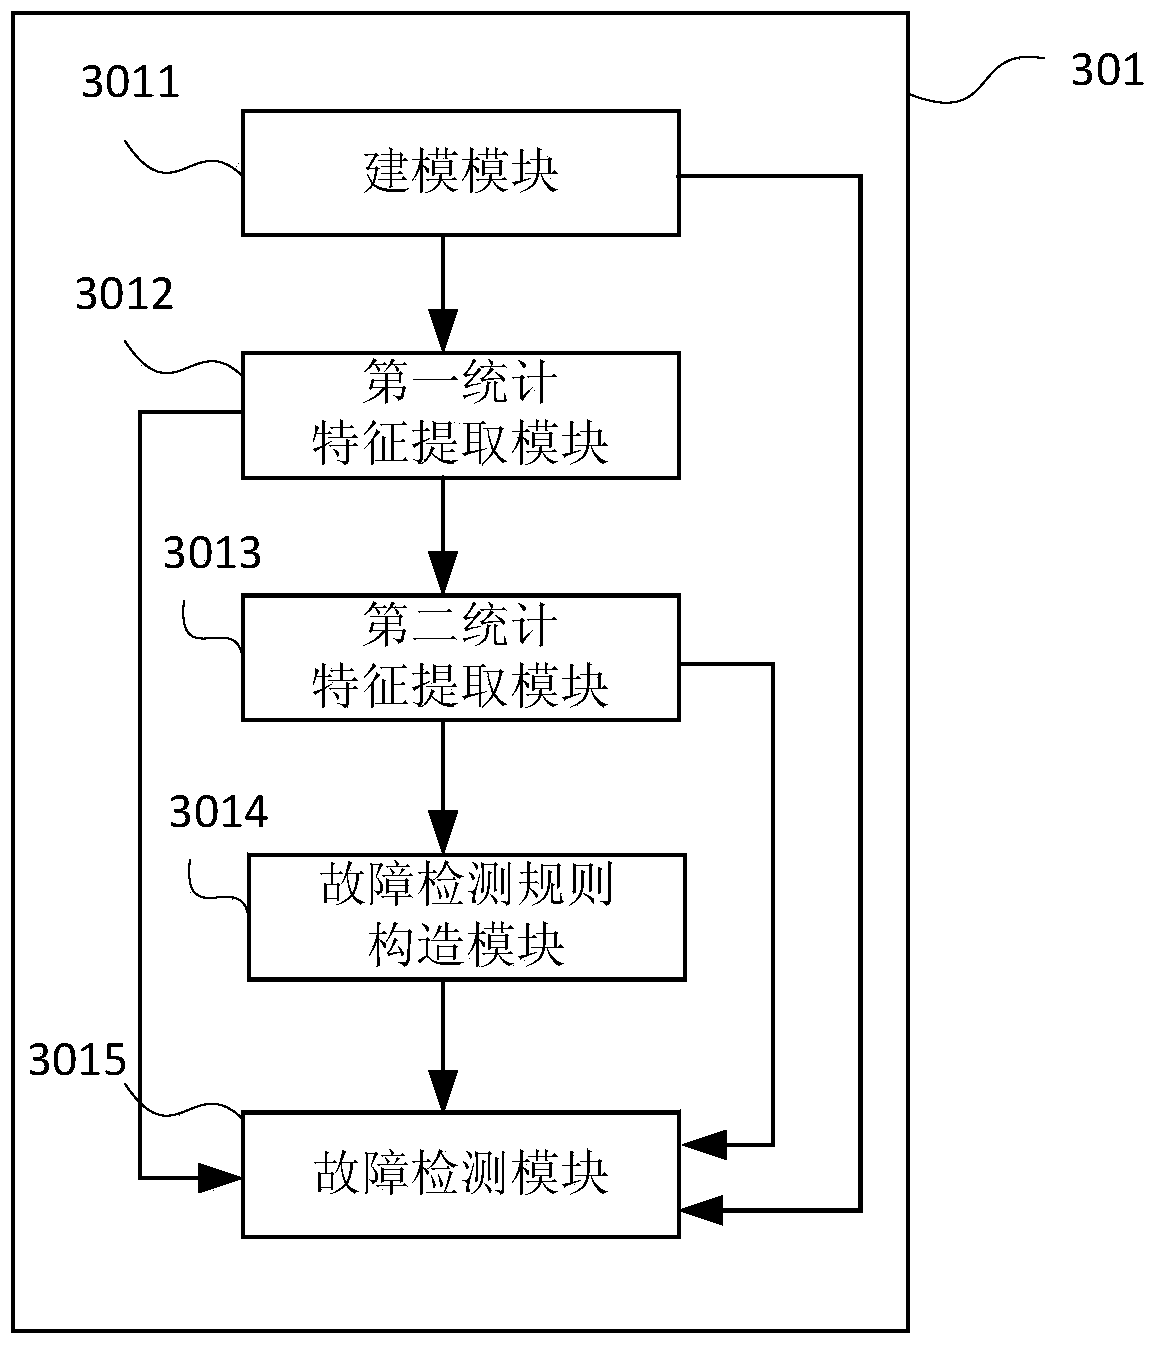 Small-fault detection method and device based on multiple moving average